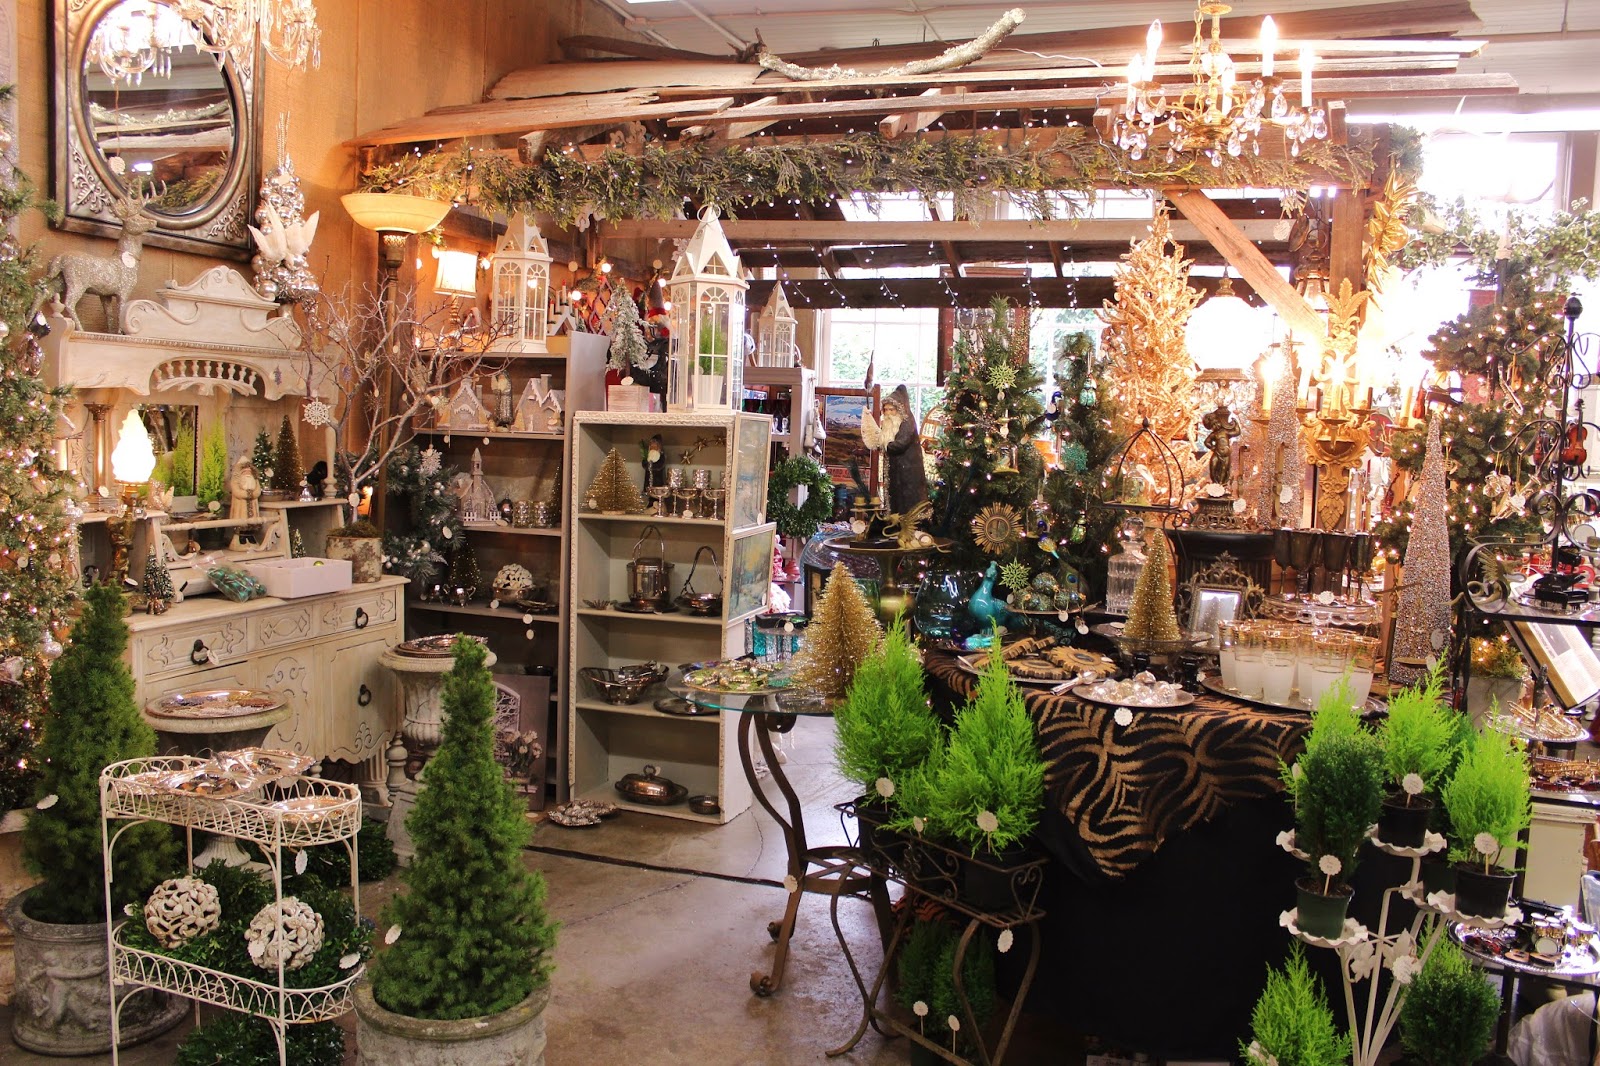 Monticello Antique Marketplace: We're Decked Out For the Holidays...